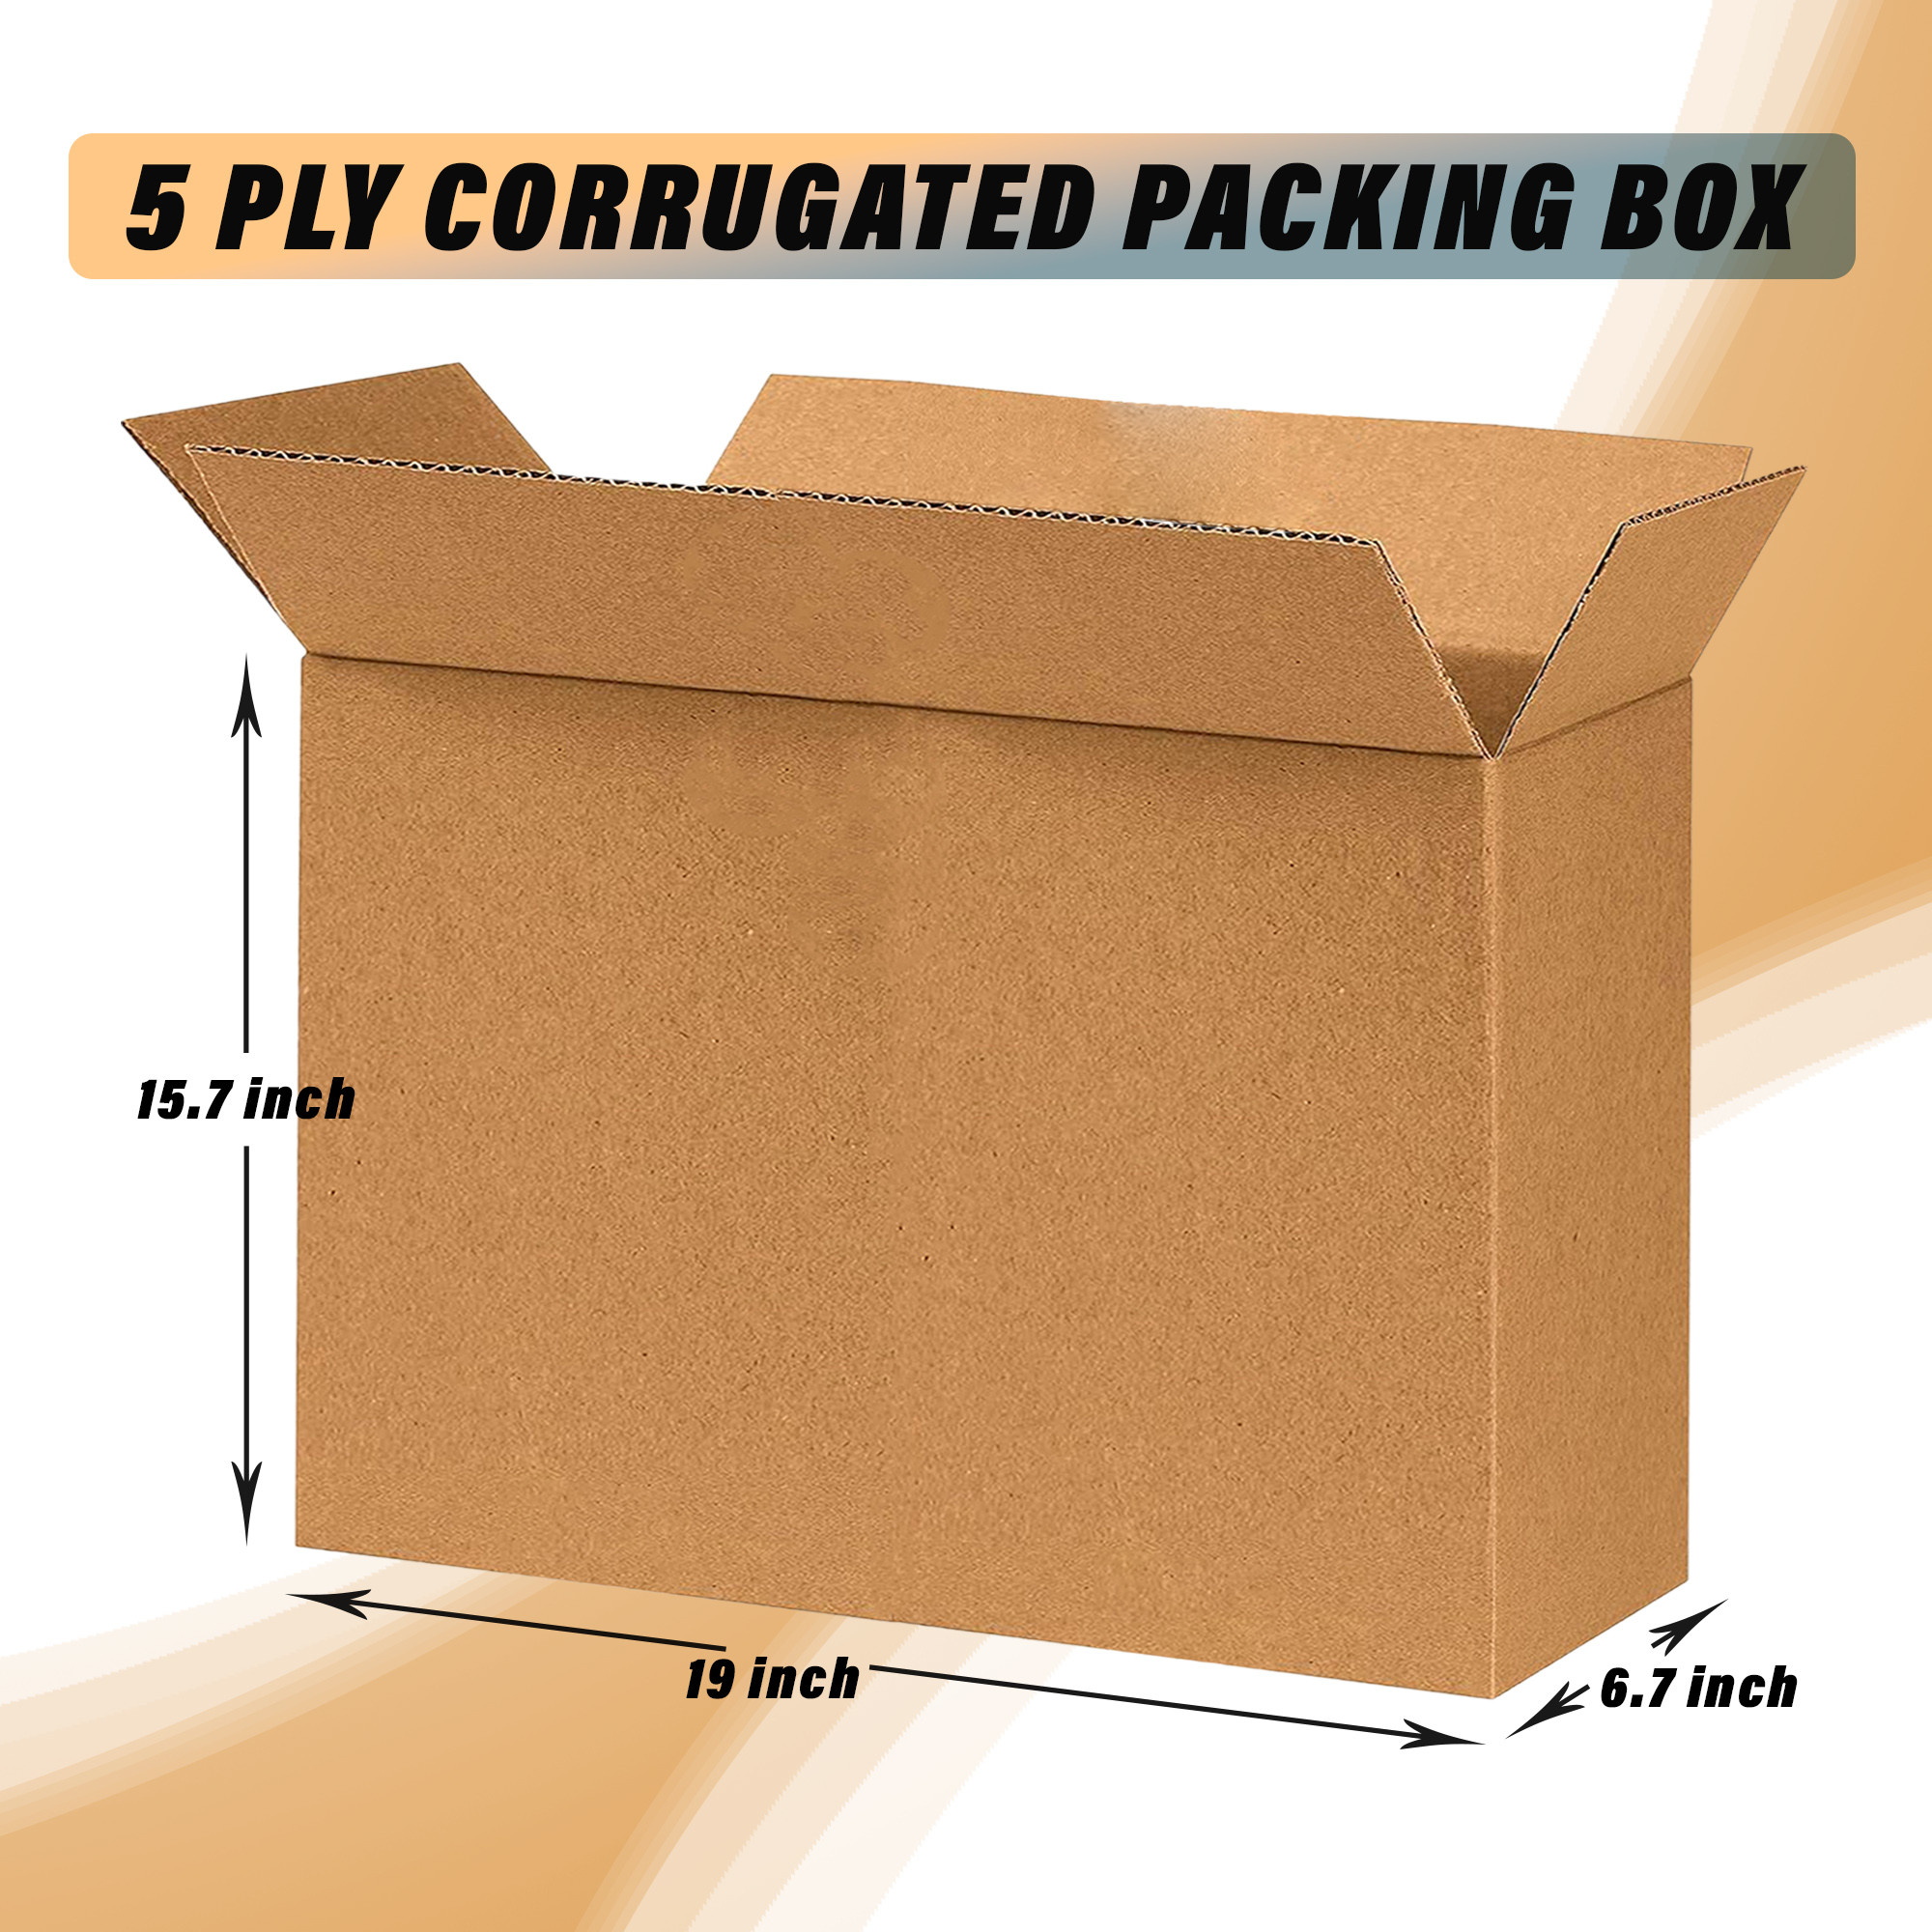 Kuber Industries Corrugated Box | 5 Ply Corrugated Packing Box | Corrugated for Shipping | Corrugated for Courier & Goods Transportation | L 19 x W 6.7 x H 15.7 Inch | Brown